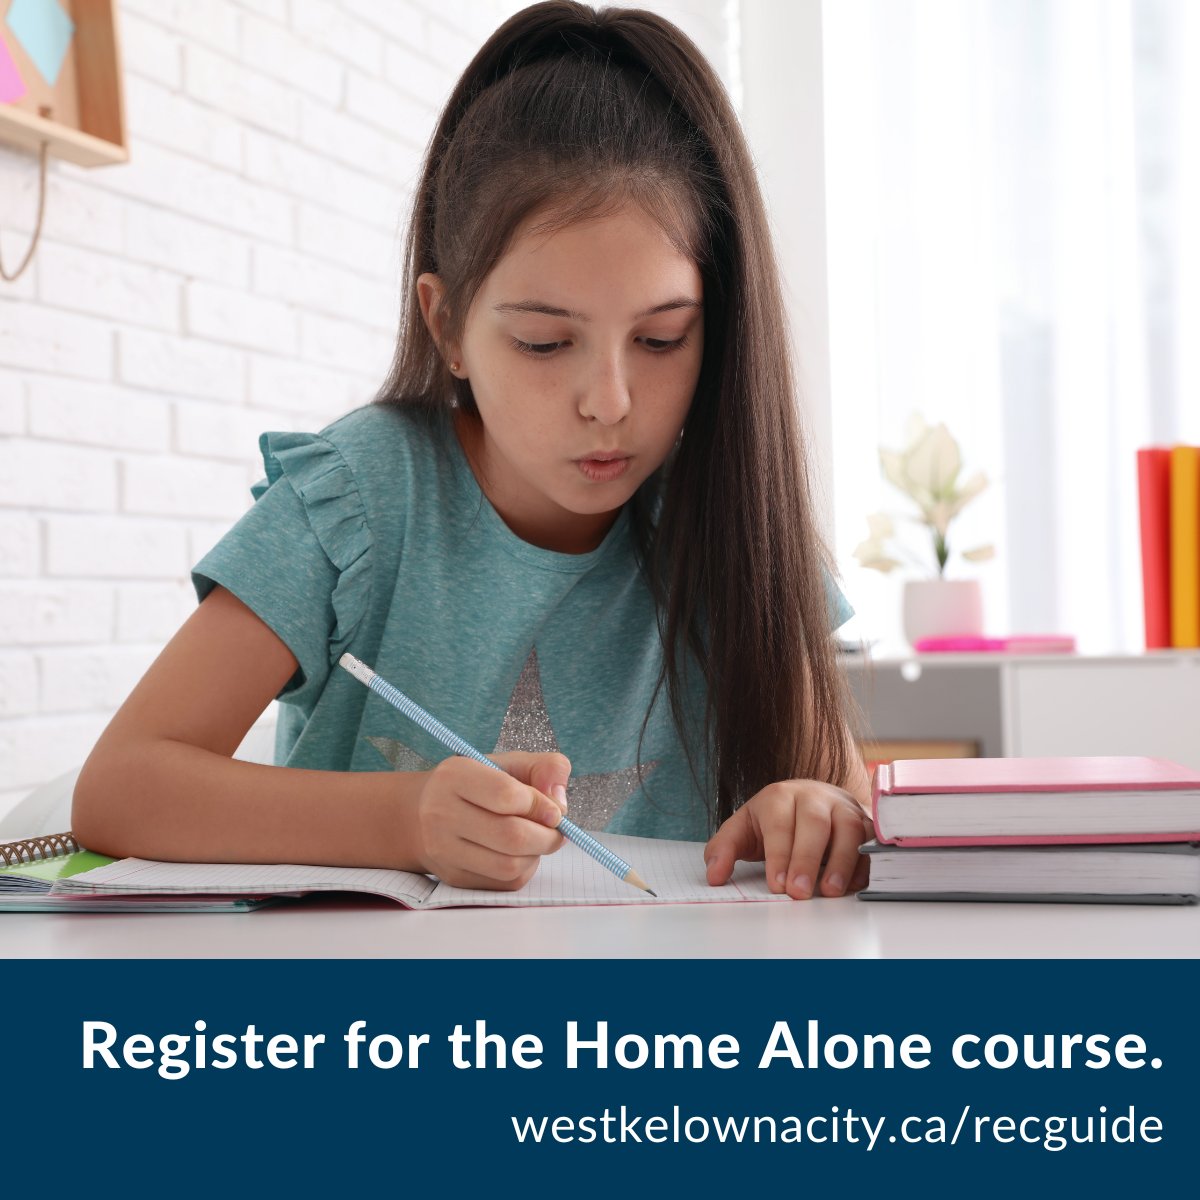 Hey parents, our Home Alone course prepares youth, ages 9-12, to responsibility look after themselves at home for short periods of time. This interactive course features hands-on activities and group learning. ➡Learn more and register online today: bit.ly/4cURbkz